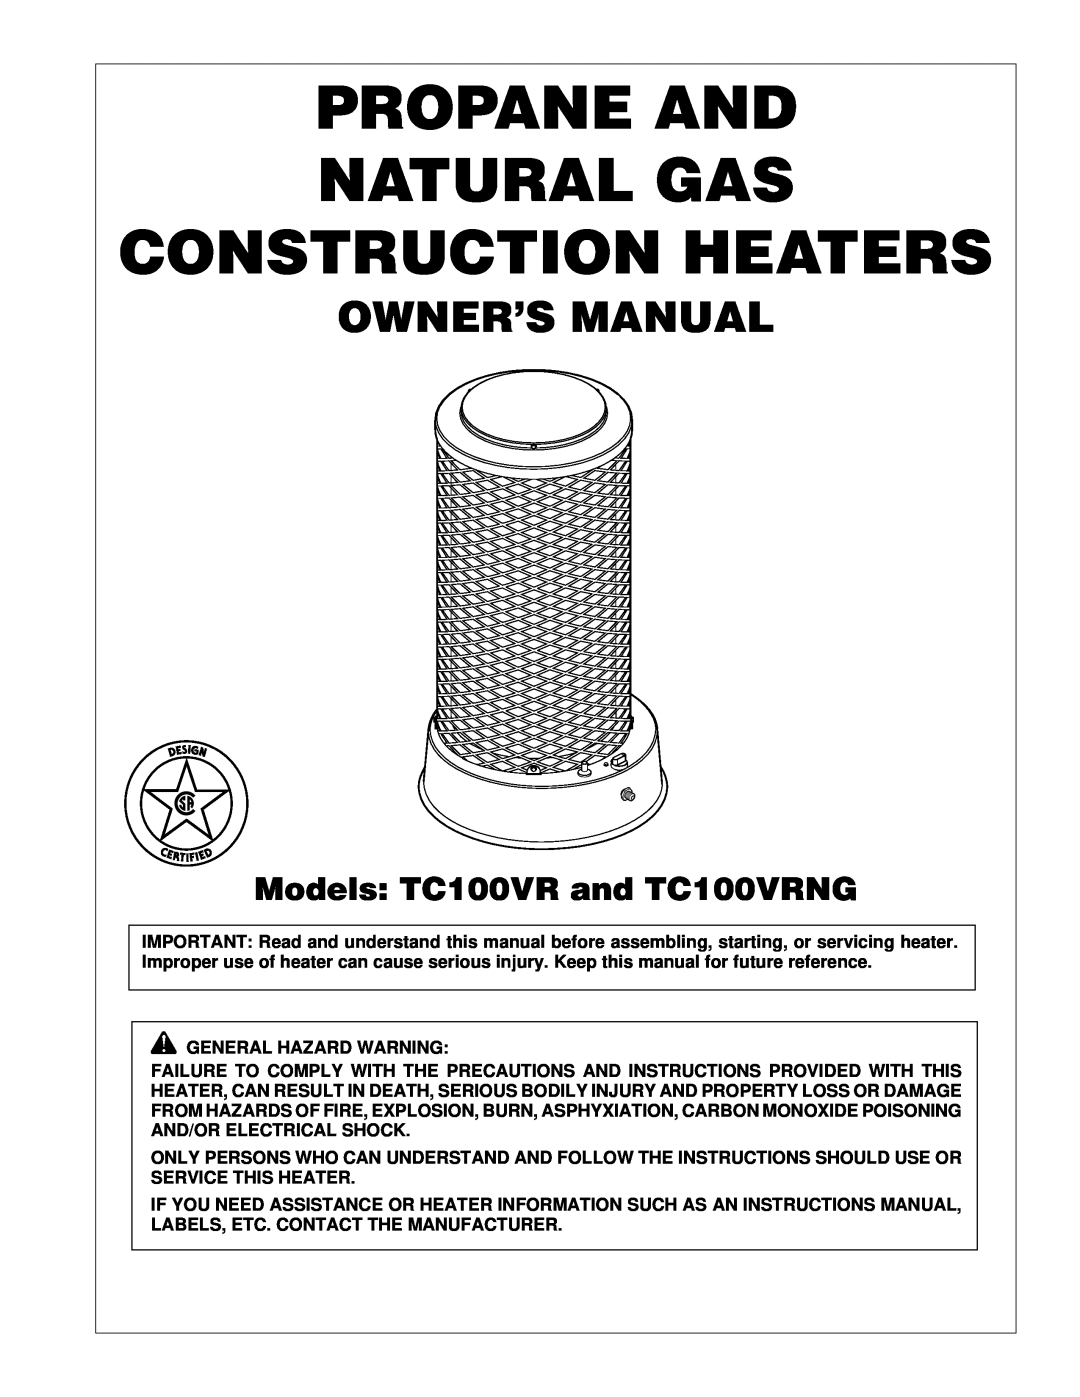 Desa owner manual Models TC100VR and TC100VRNG, Propane And Natural Gas Construction Heaters 